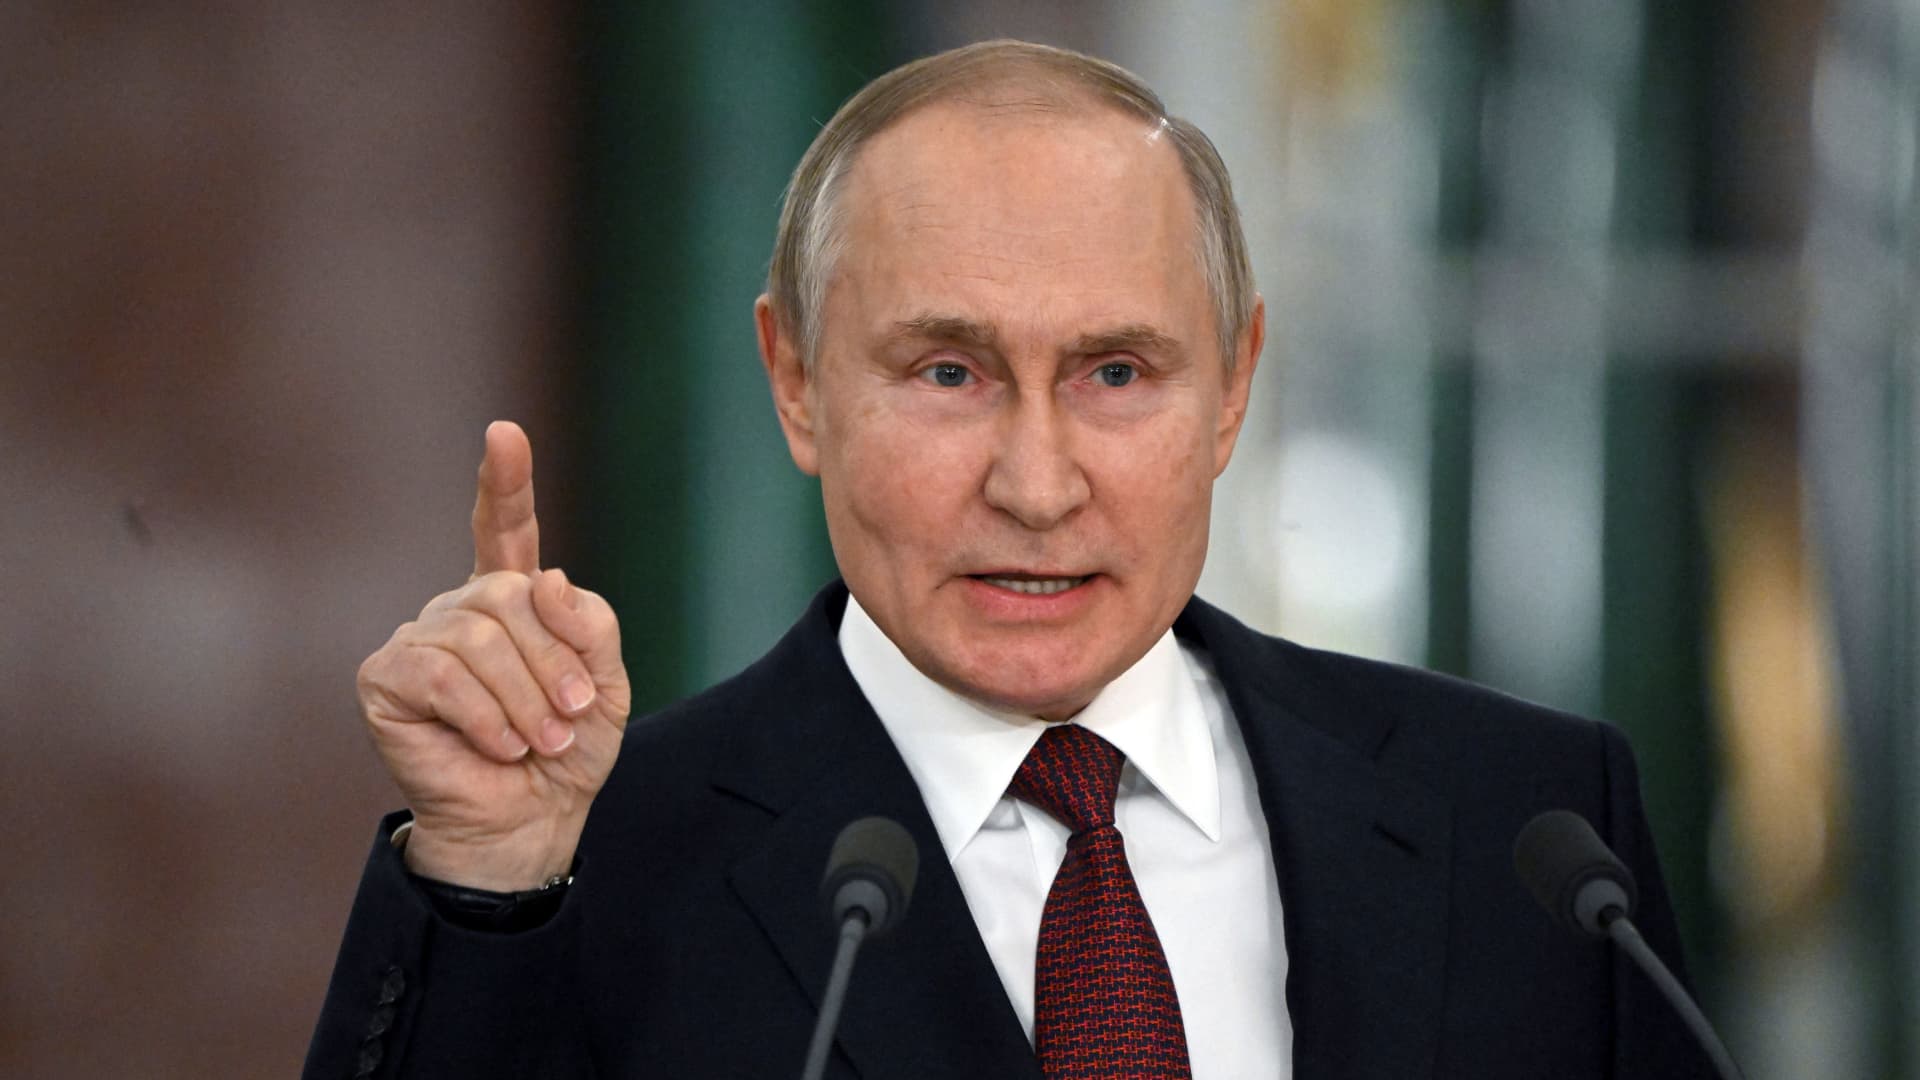 Putin says Russia is ready to negotiate over war in Ukraine